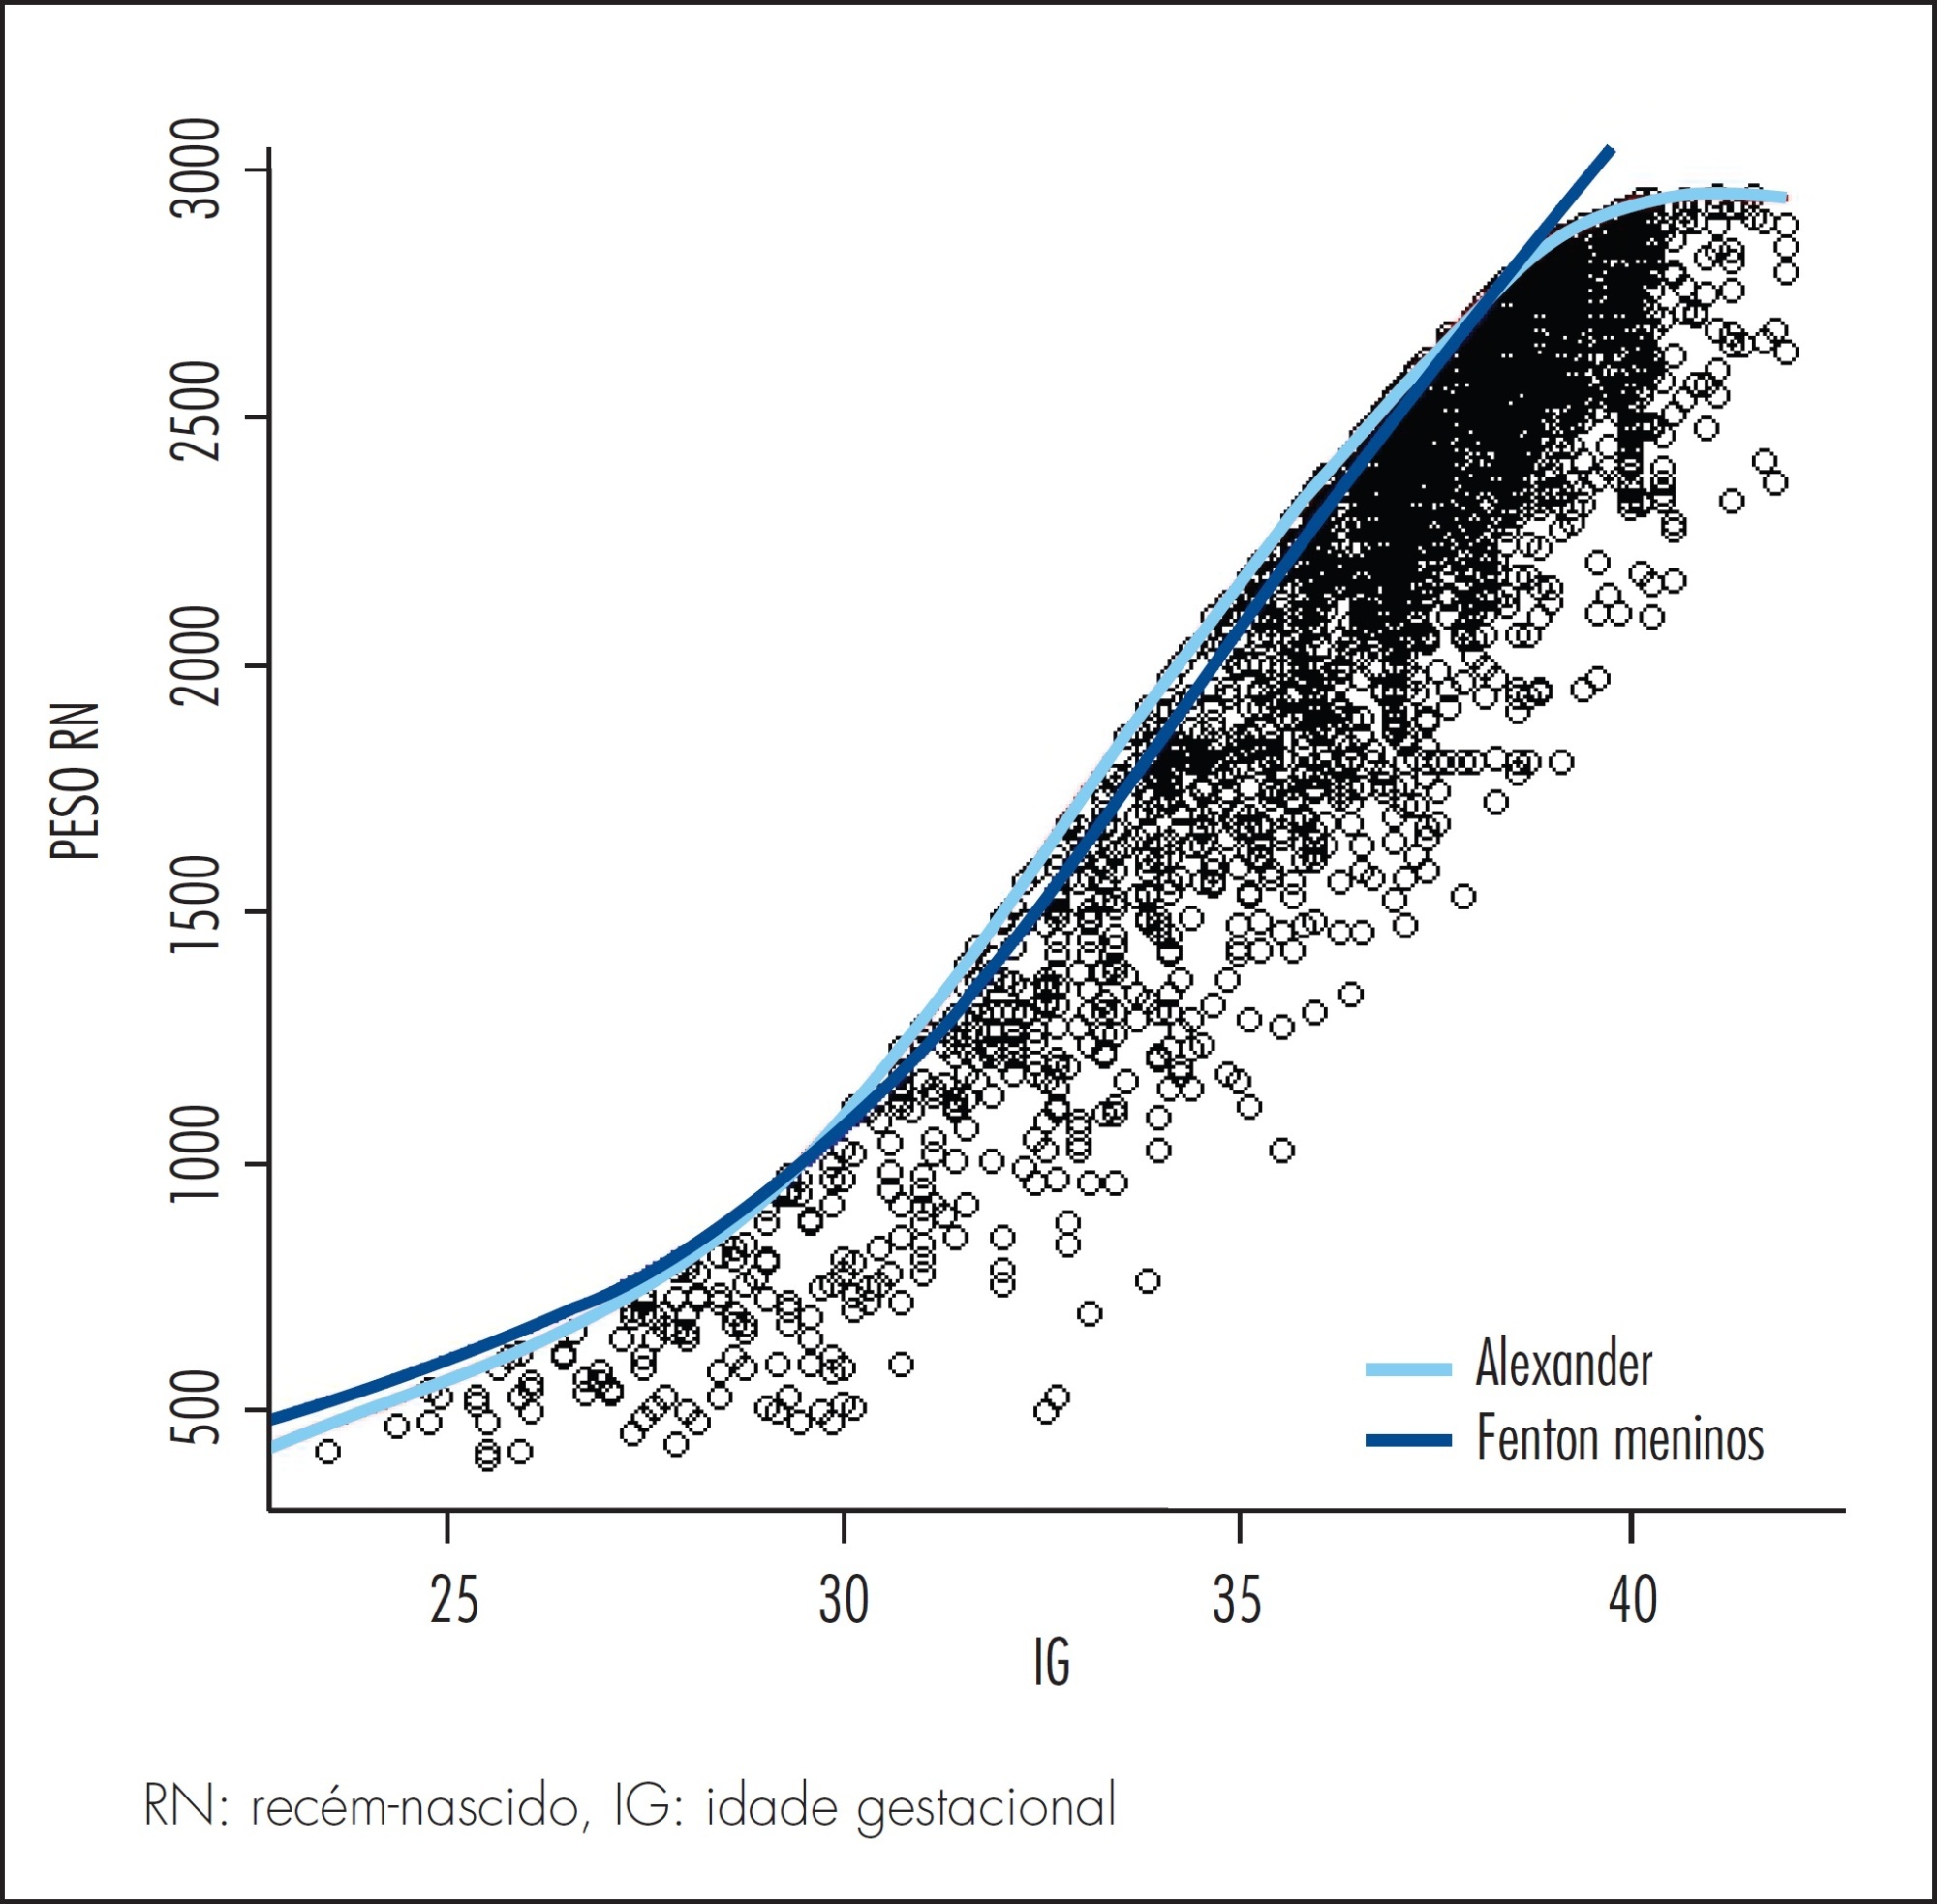 Comparison between two growth curves for small for gestational age diagnosis